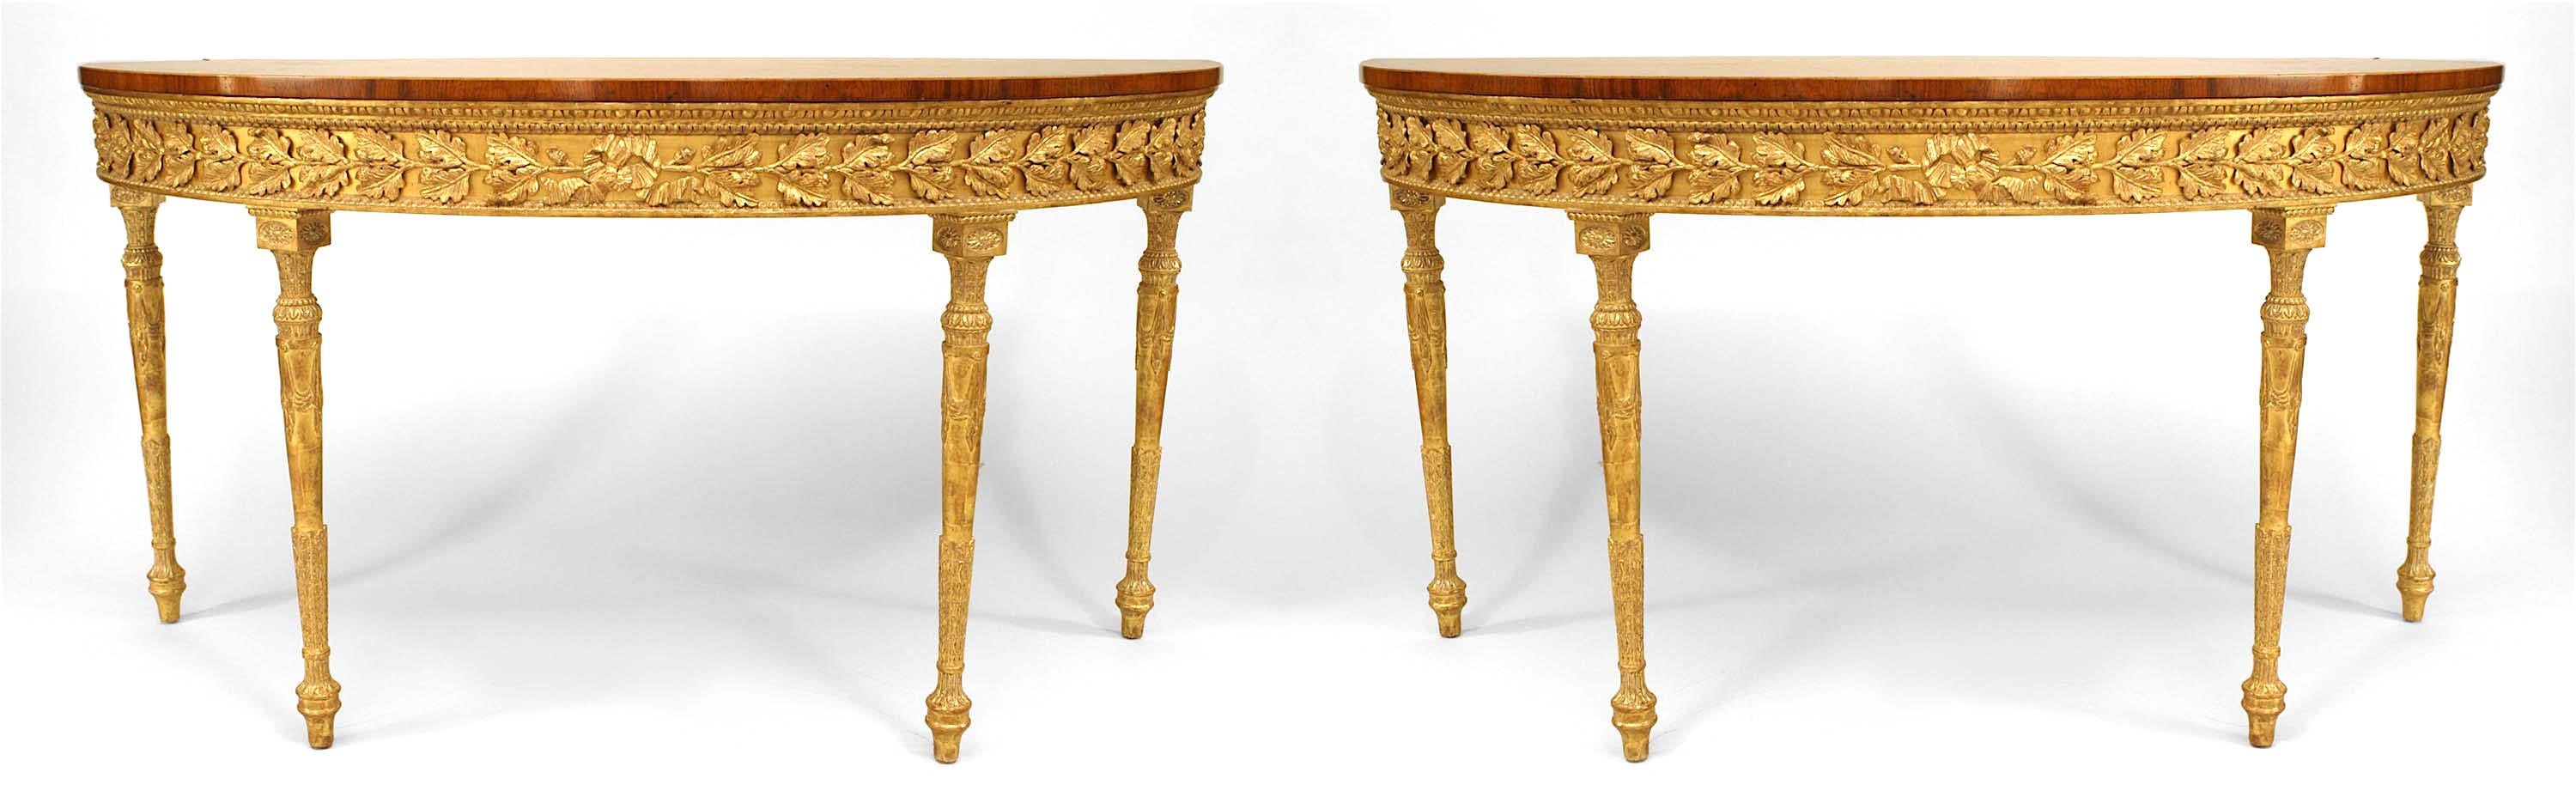 Pair of English Georgian-style (19th Century) satinwood demilune shaped console tables with mahogany banding inlaid with scrolling design over a gilt & applied floral carved apron & legs. (PRICED AS Pair)
